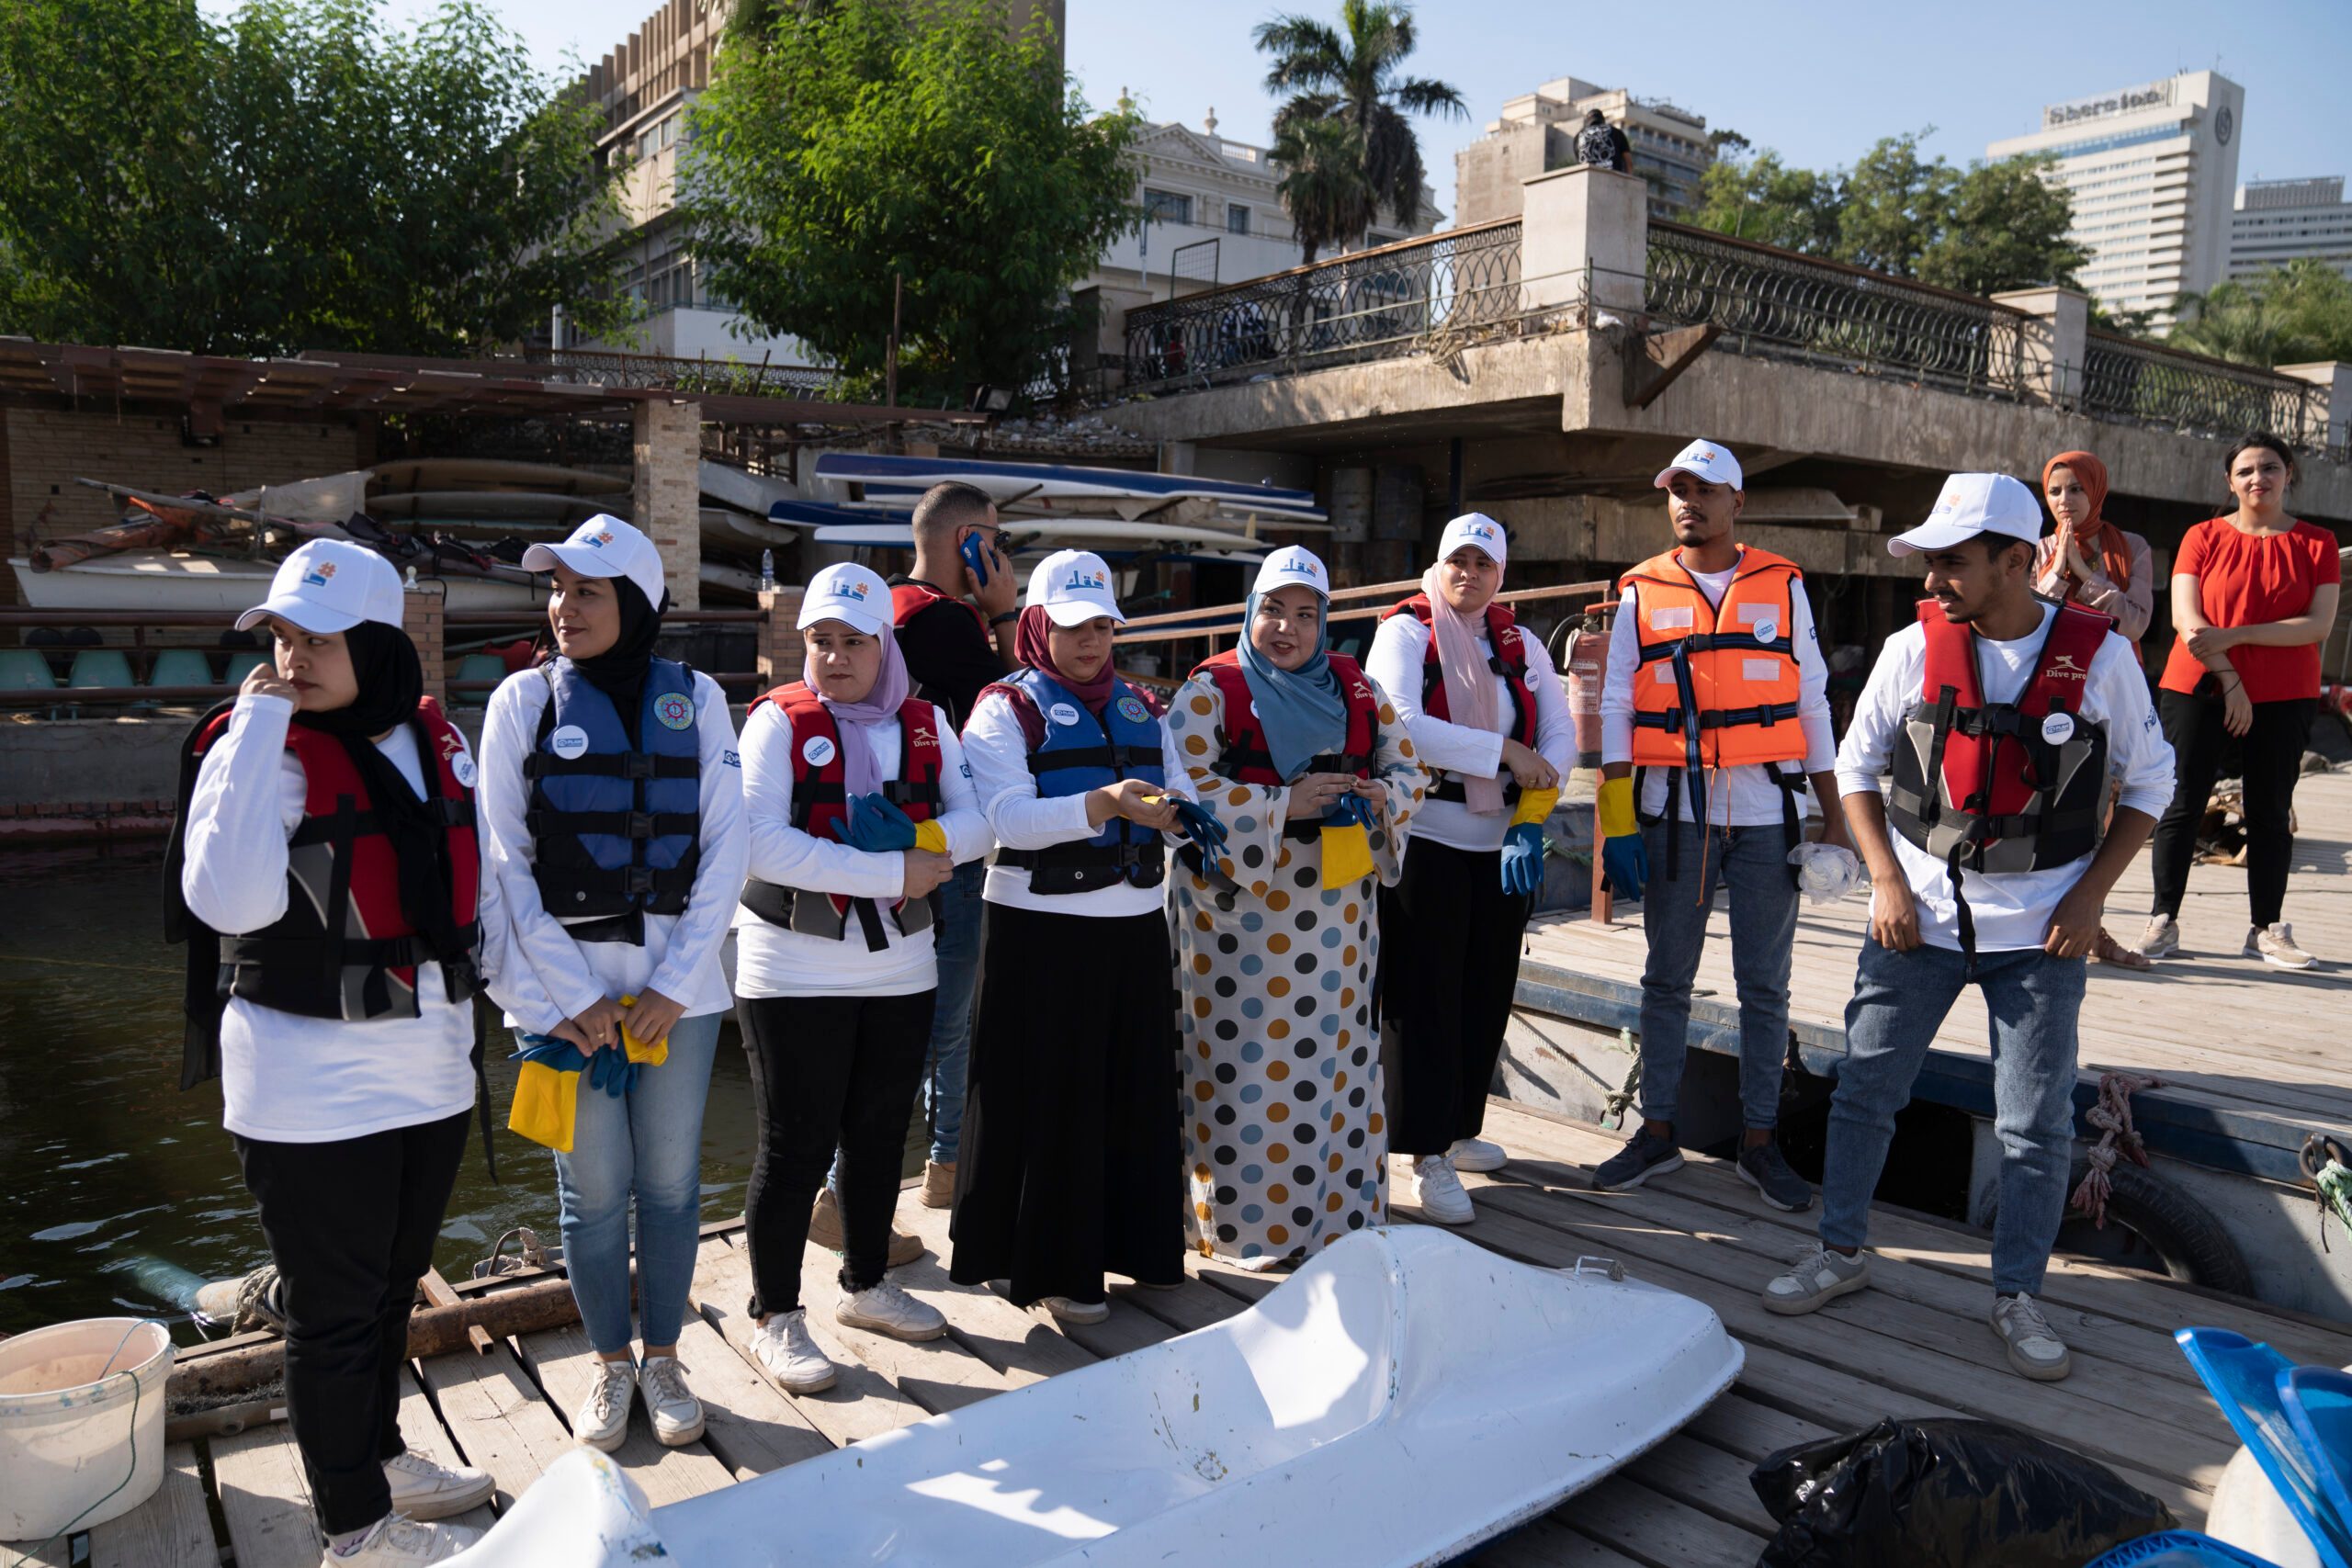 Young people stand together wearing life-jackets as they prepare for a Nile cleaning initiative.